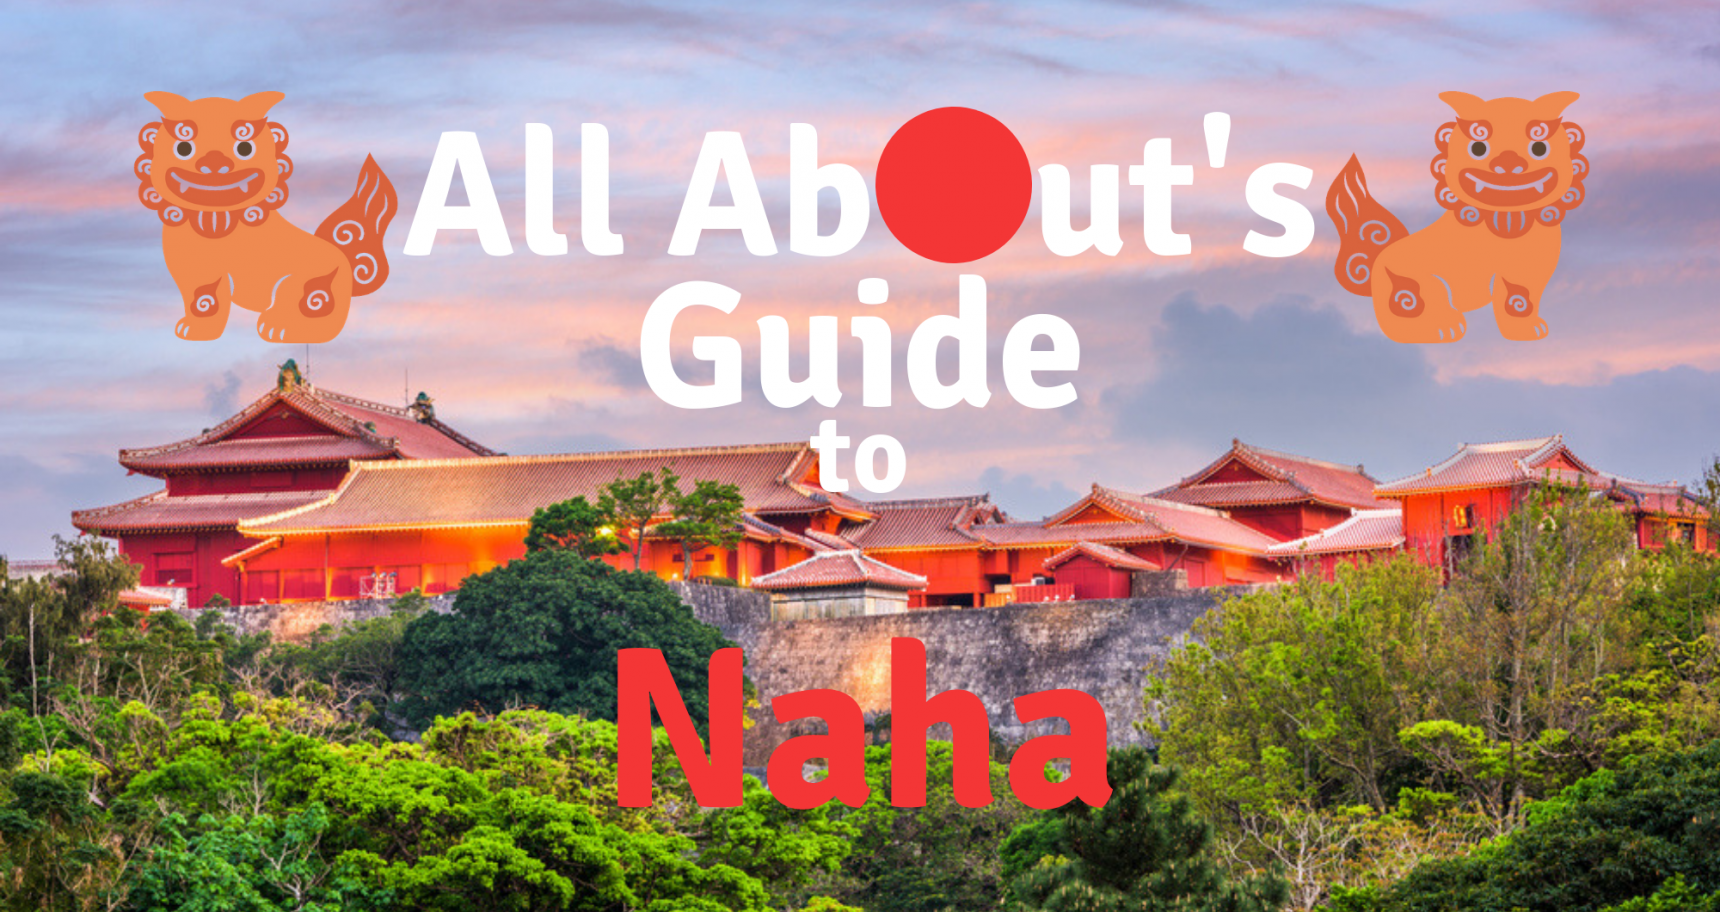 All About's Guide to Naha